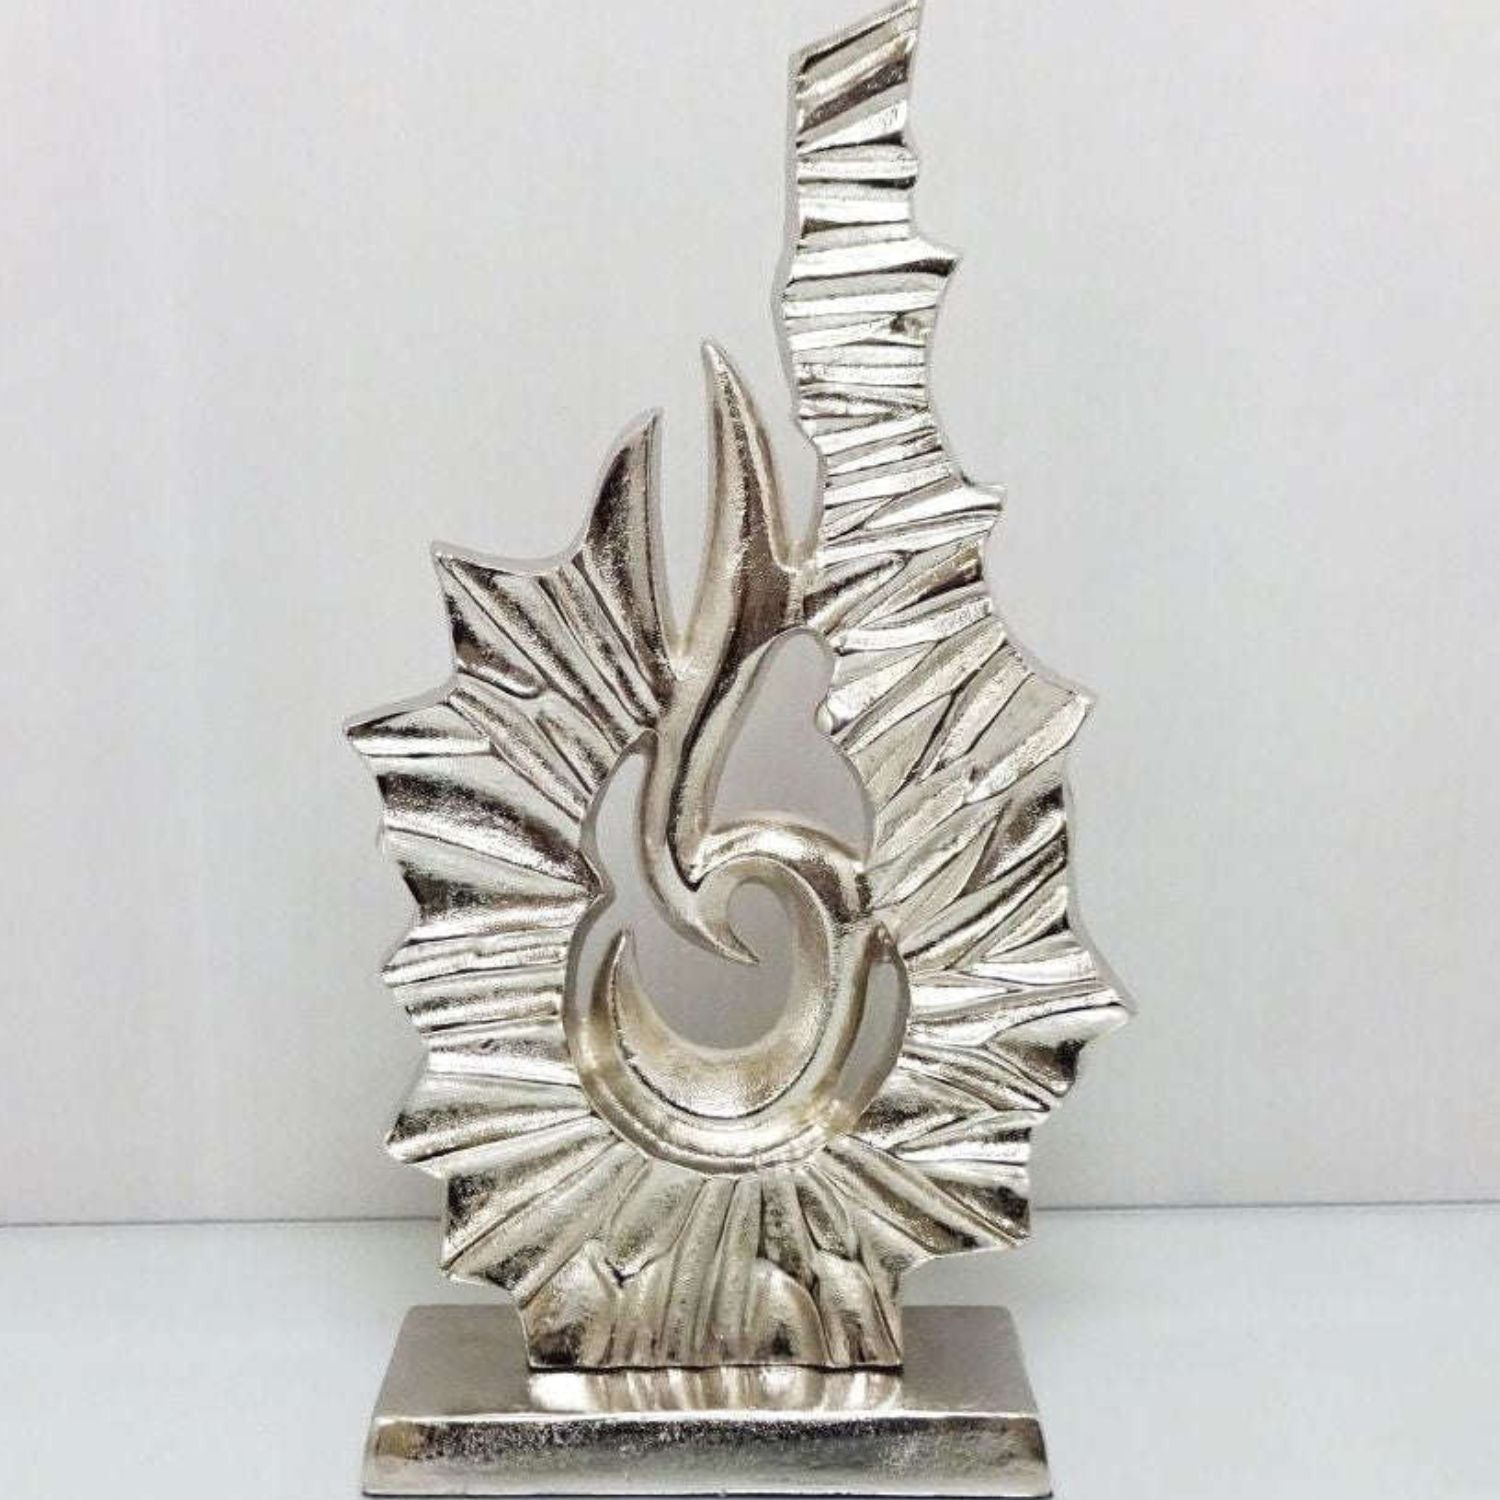 Large silver sculpture ornament in an abstract design